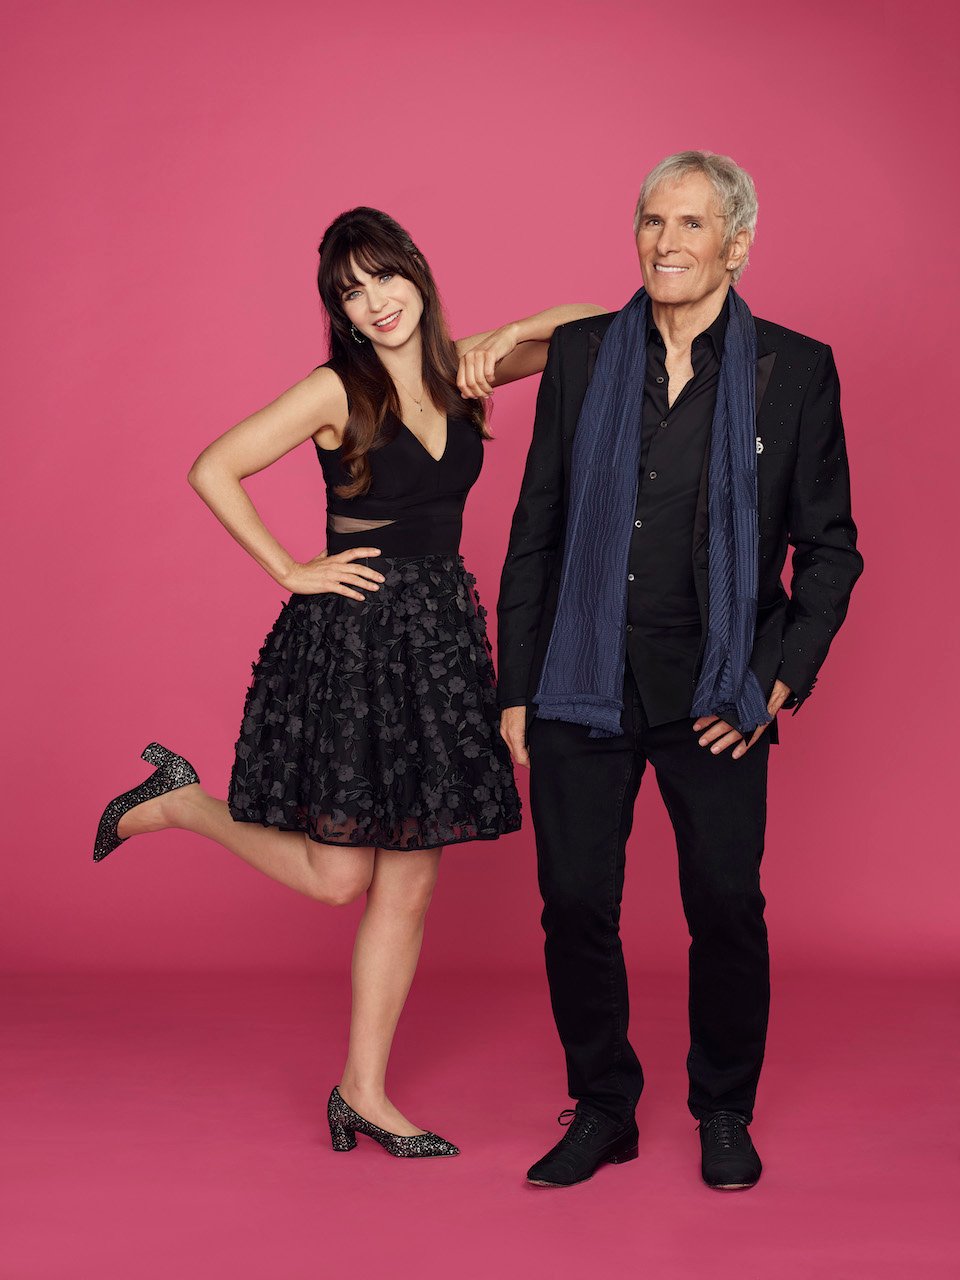 'The Celebrity Dating Game' stars Zooey Deschanel and Michael Bolton